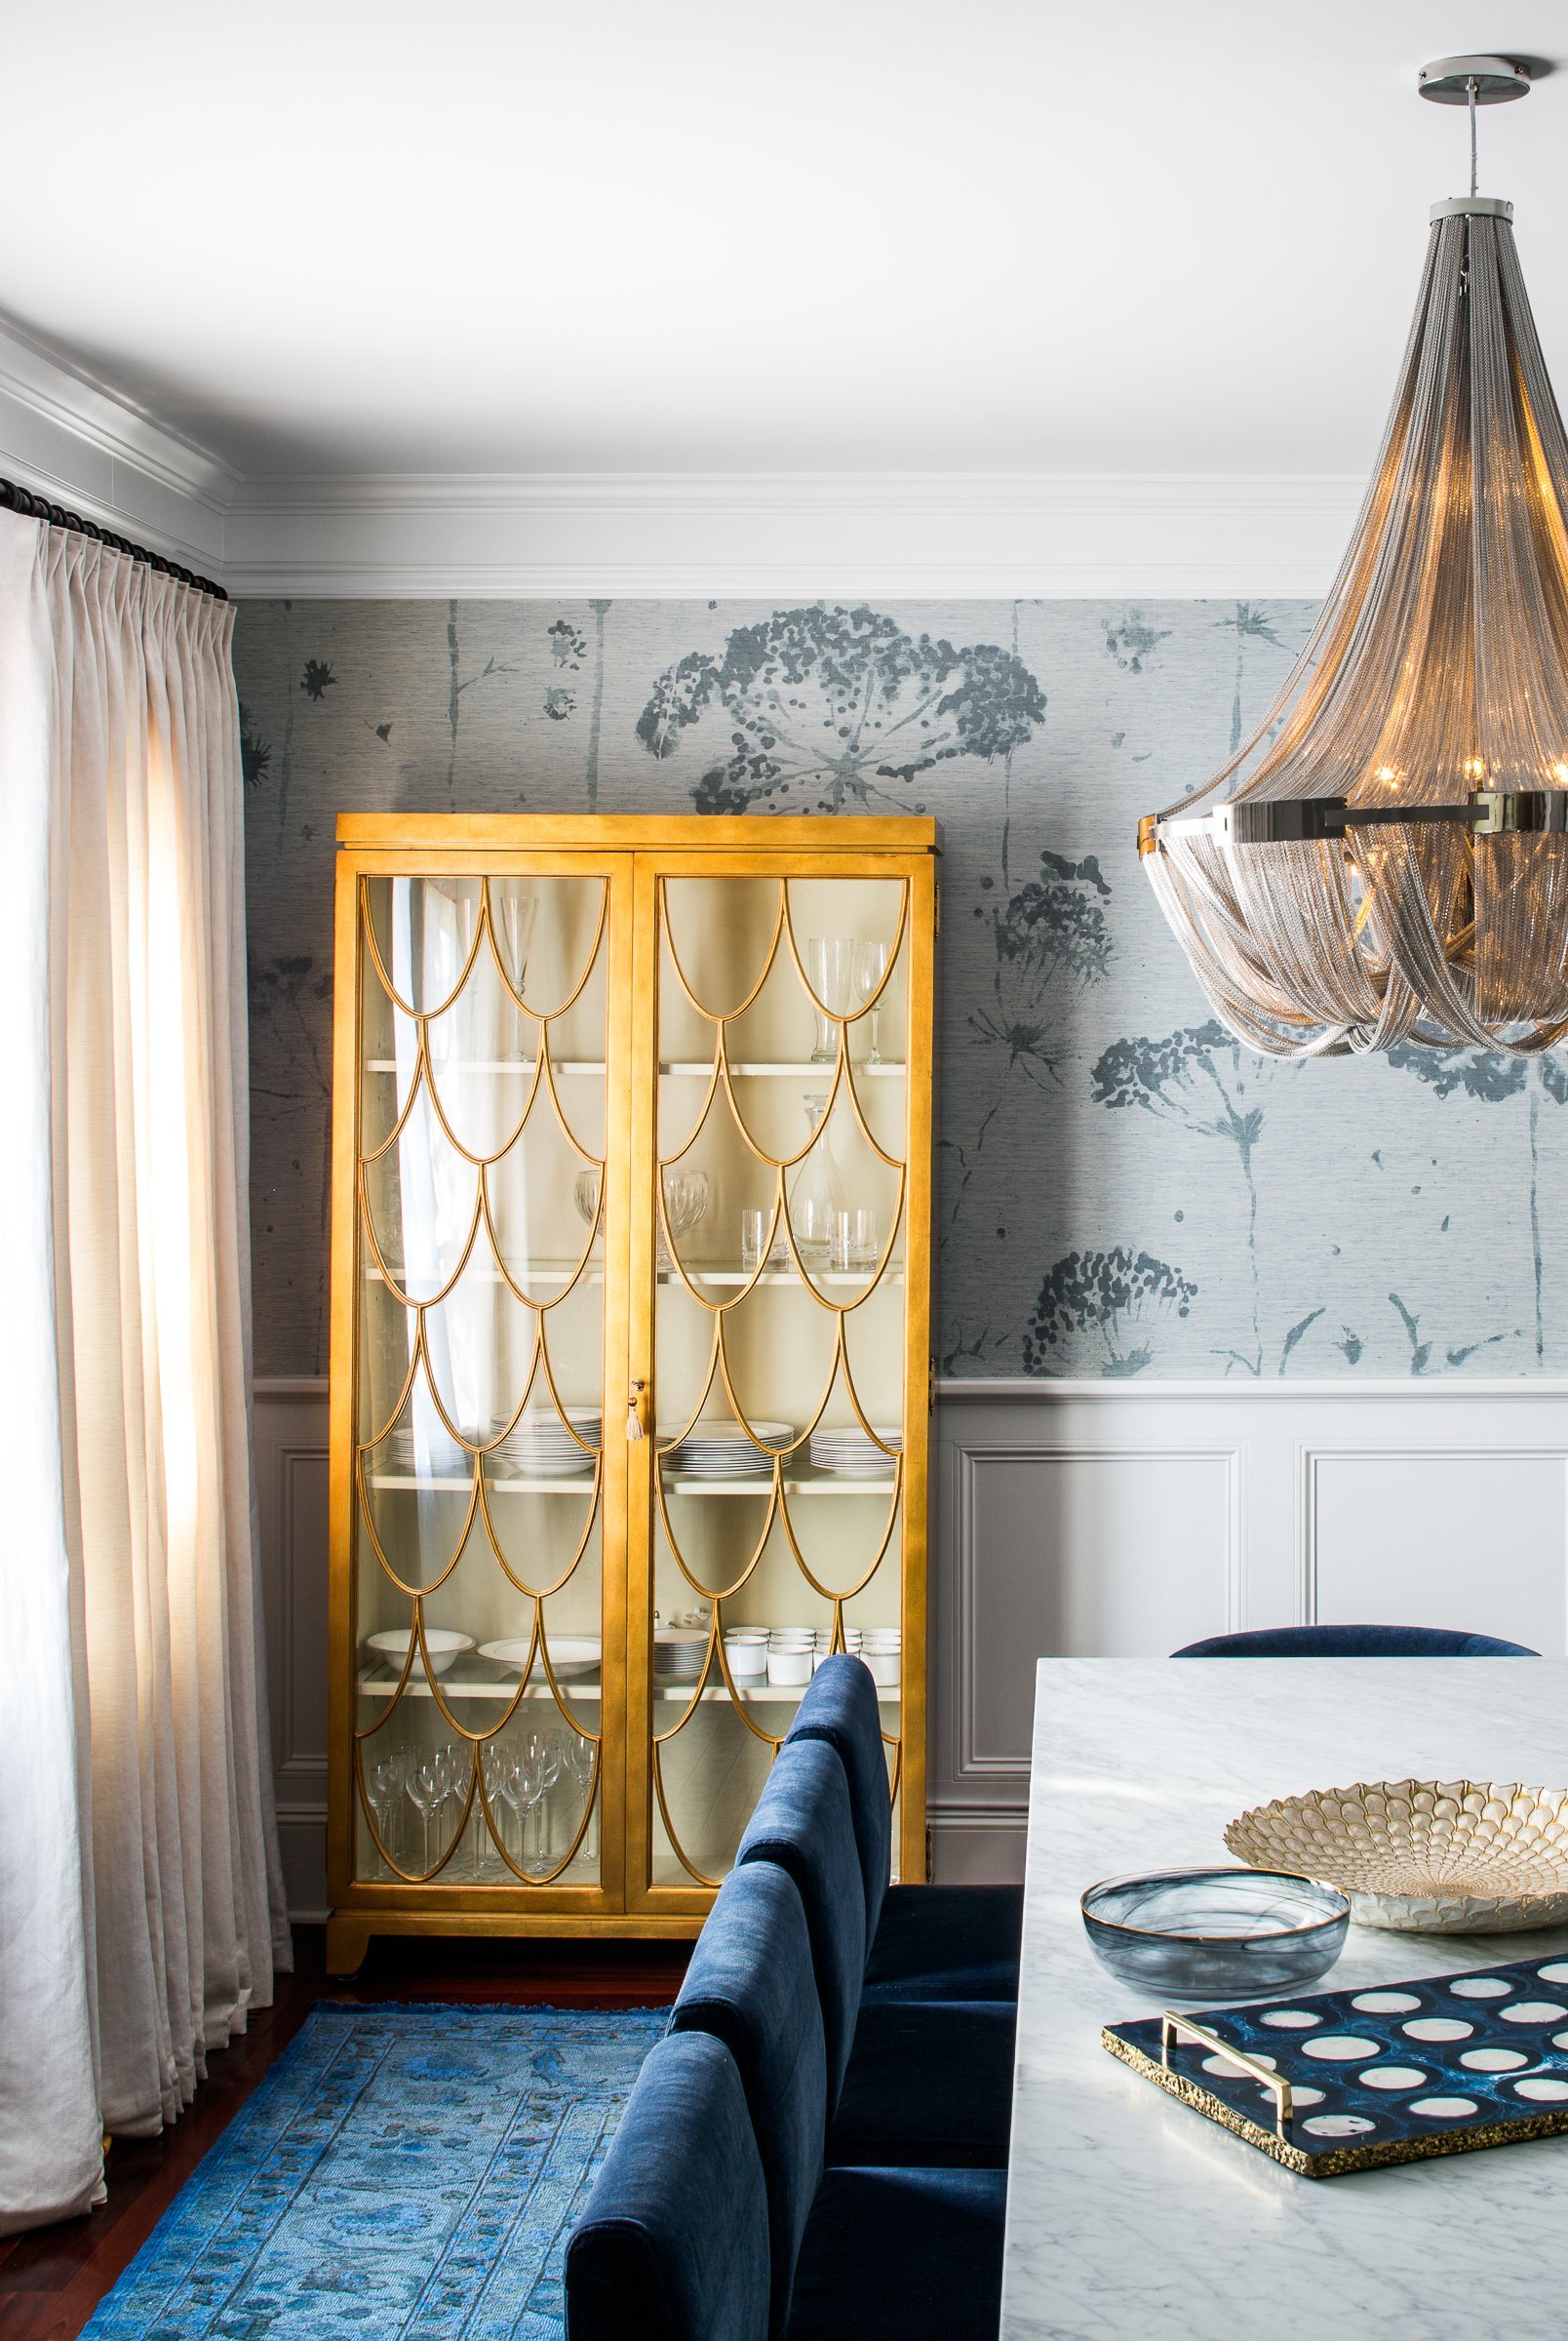 KNOF design creates a beautiful blue dining room with metallic accents